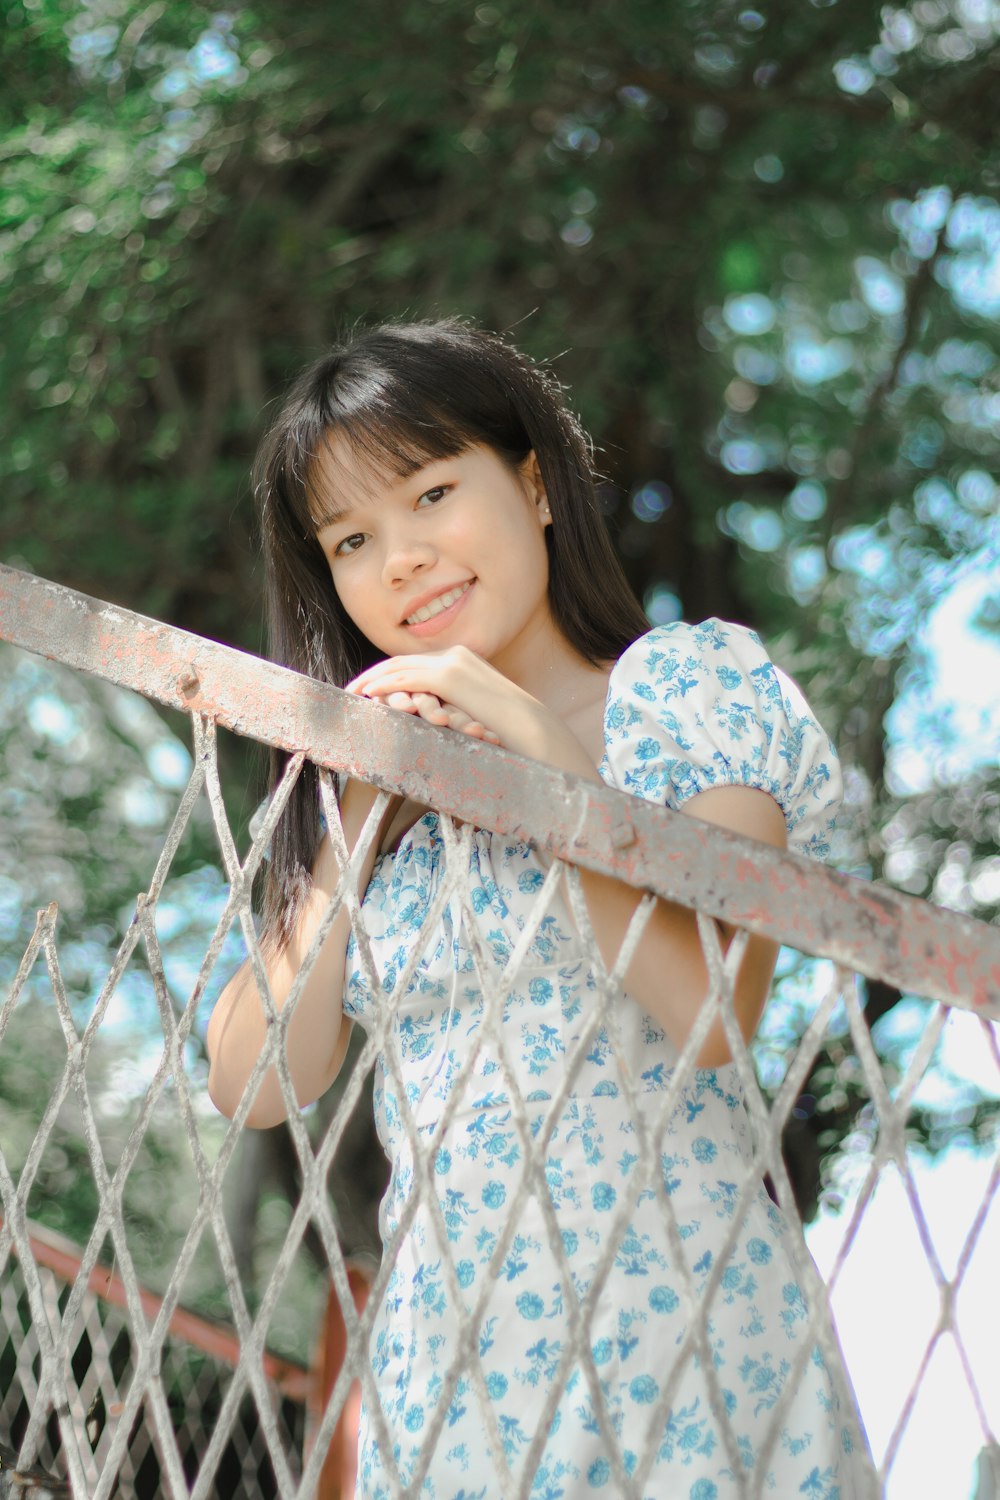 a girl leaning on a fence with her hand on her chin